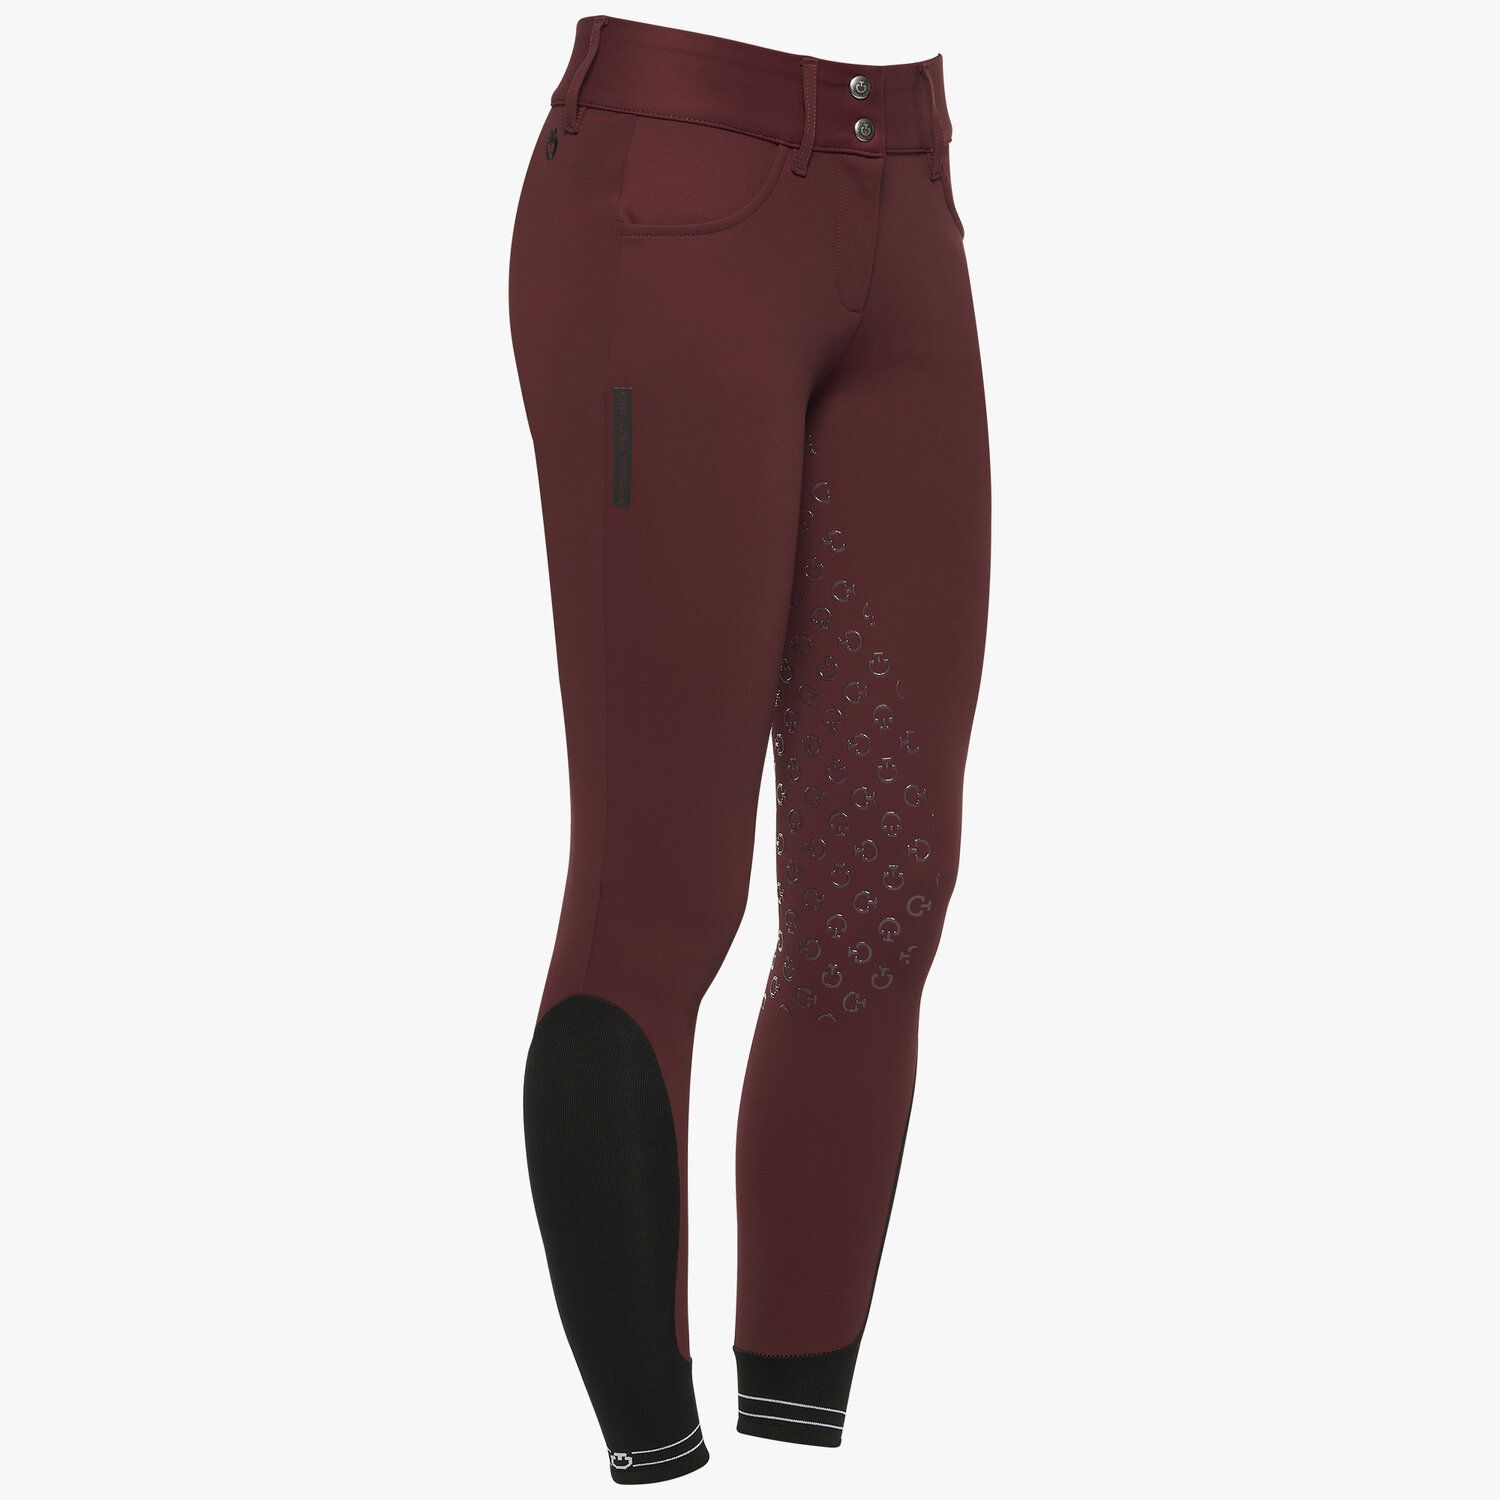 Cavalleria Toscana Women's dressage breeches with perforated logo tape BORDEAUX-1